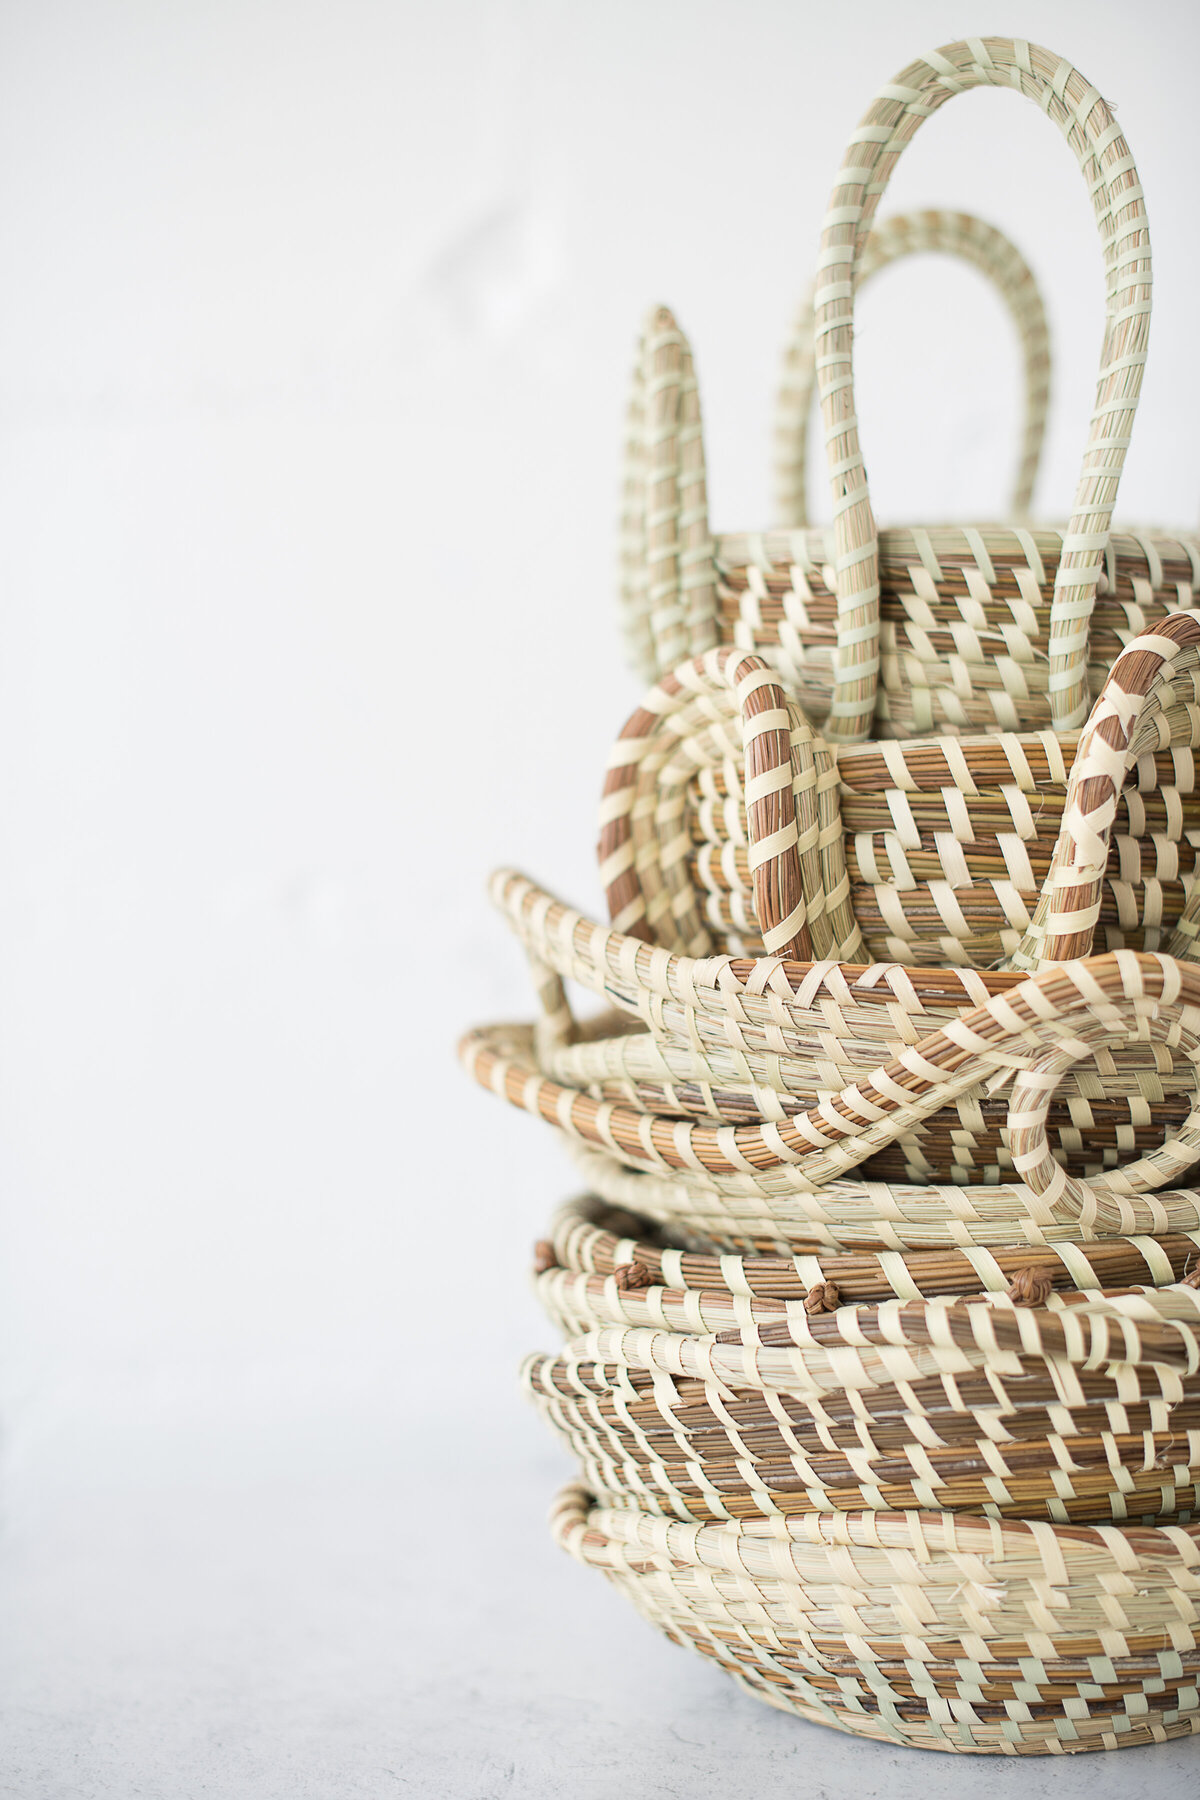 Sweetgrass Baskets_Highlights (18 of 22)